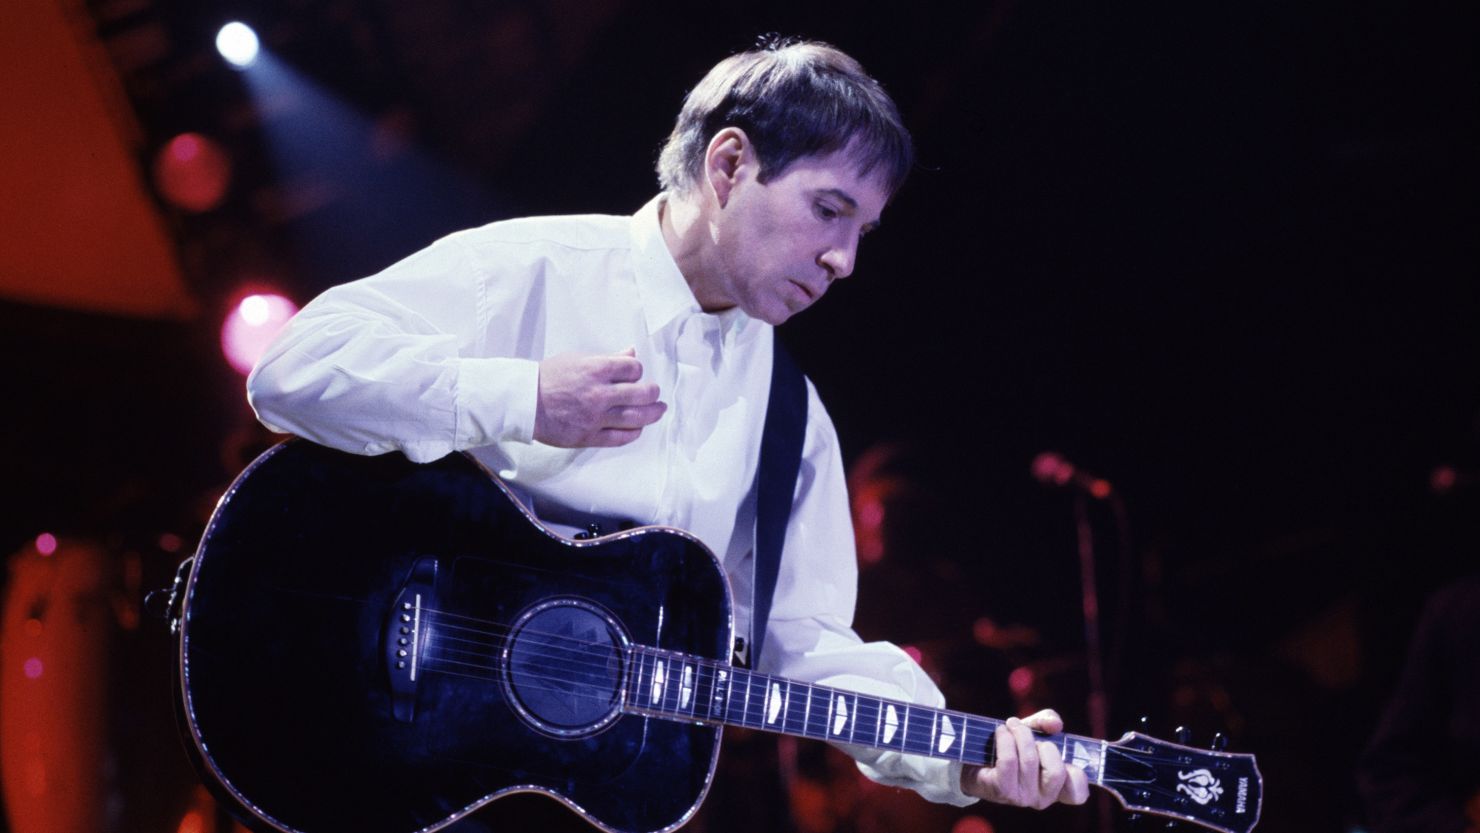 Paul Simon in the two-part documentary "In Restless Dreams: The Music of Paul Simon."